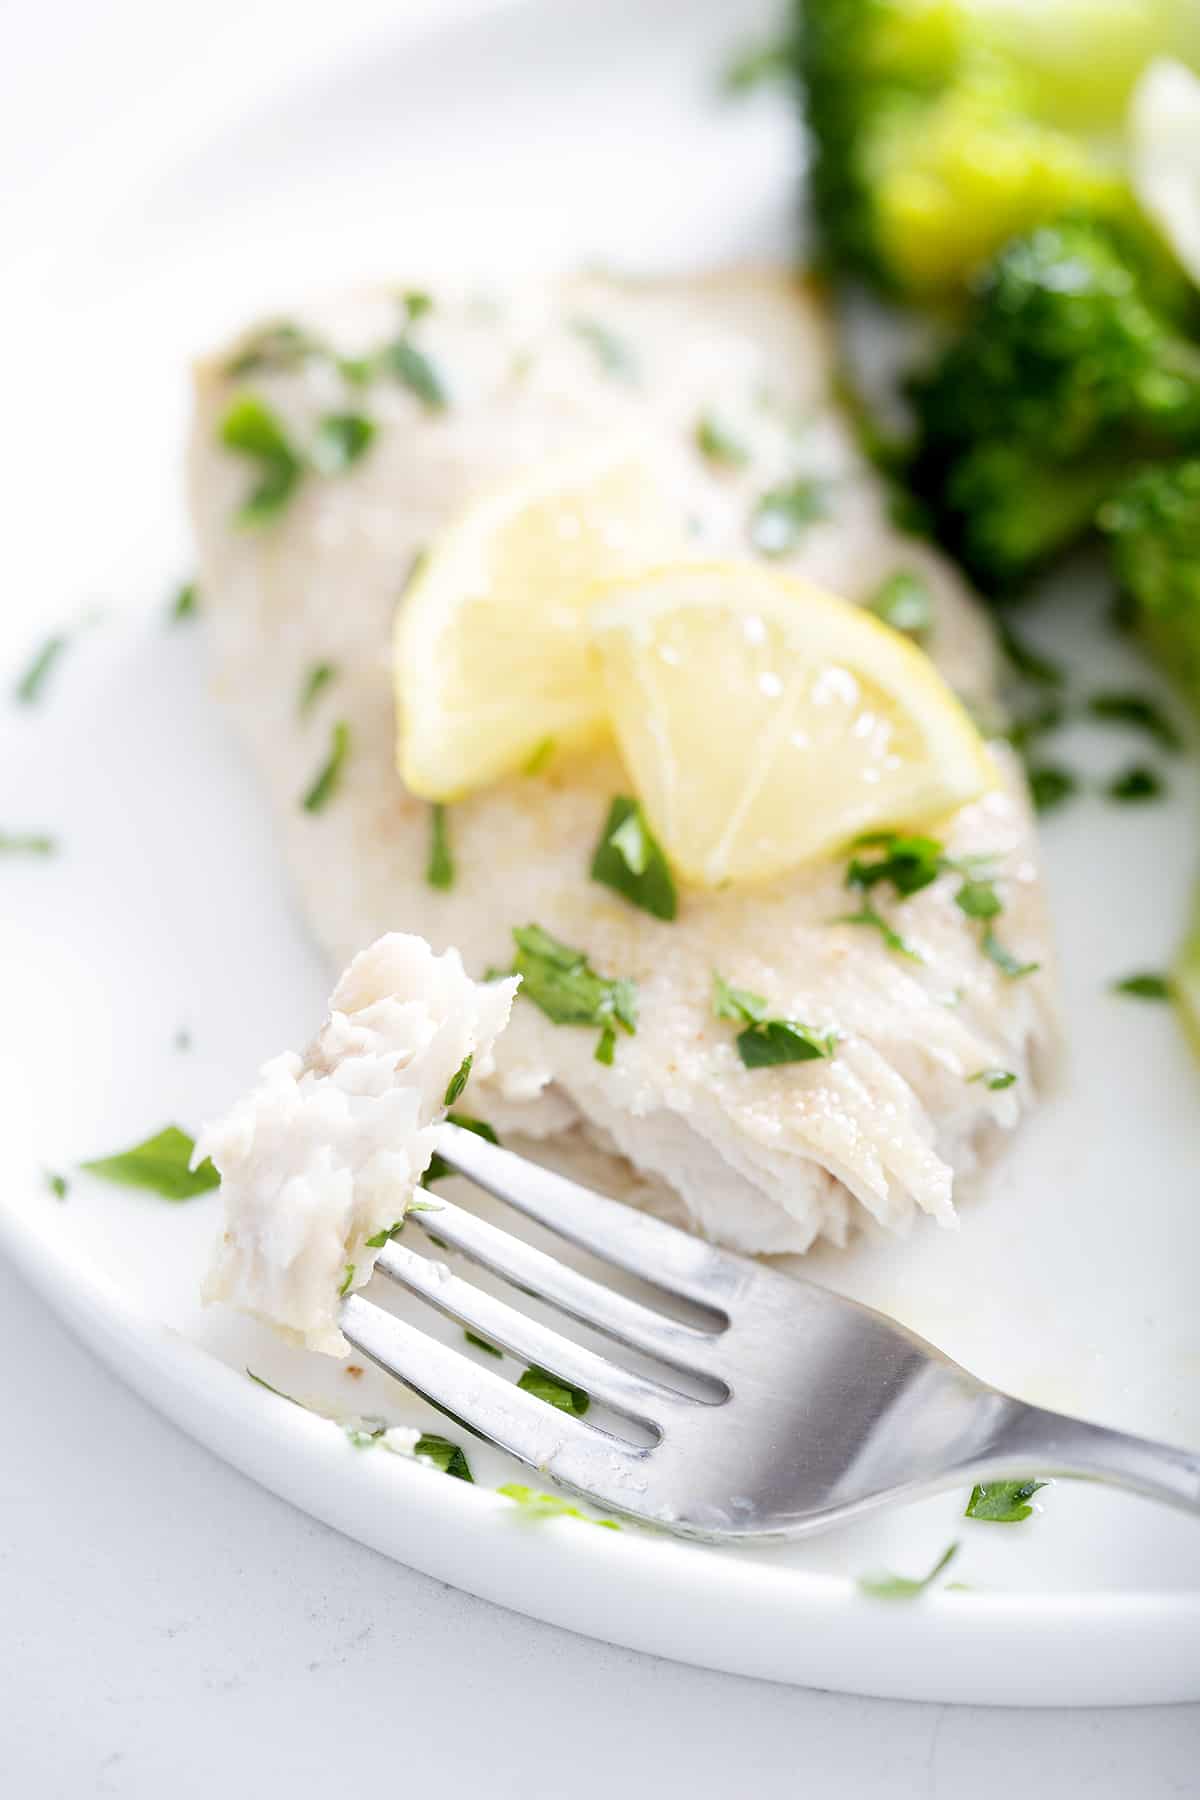 forkful of halibut fillet with parsley and lemon slices on white plate